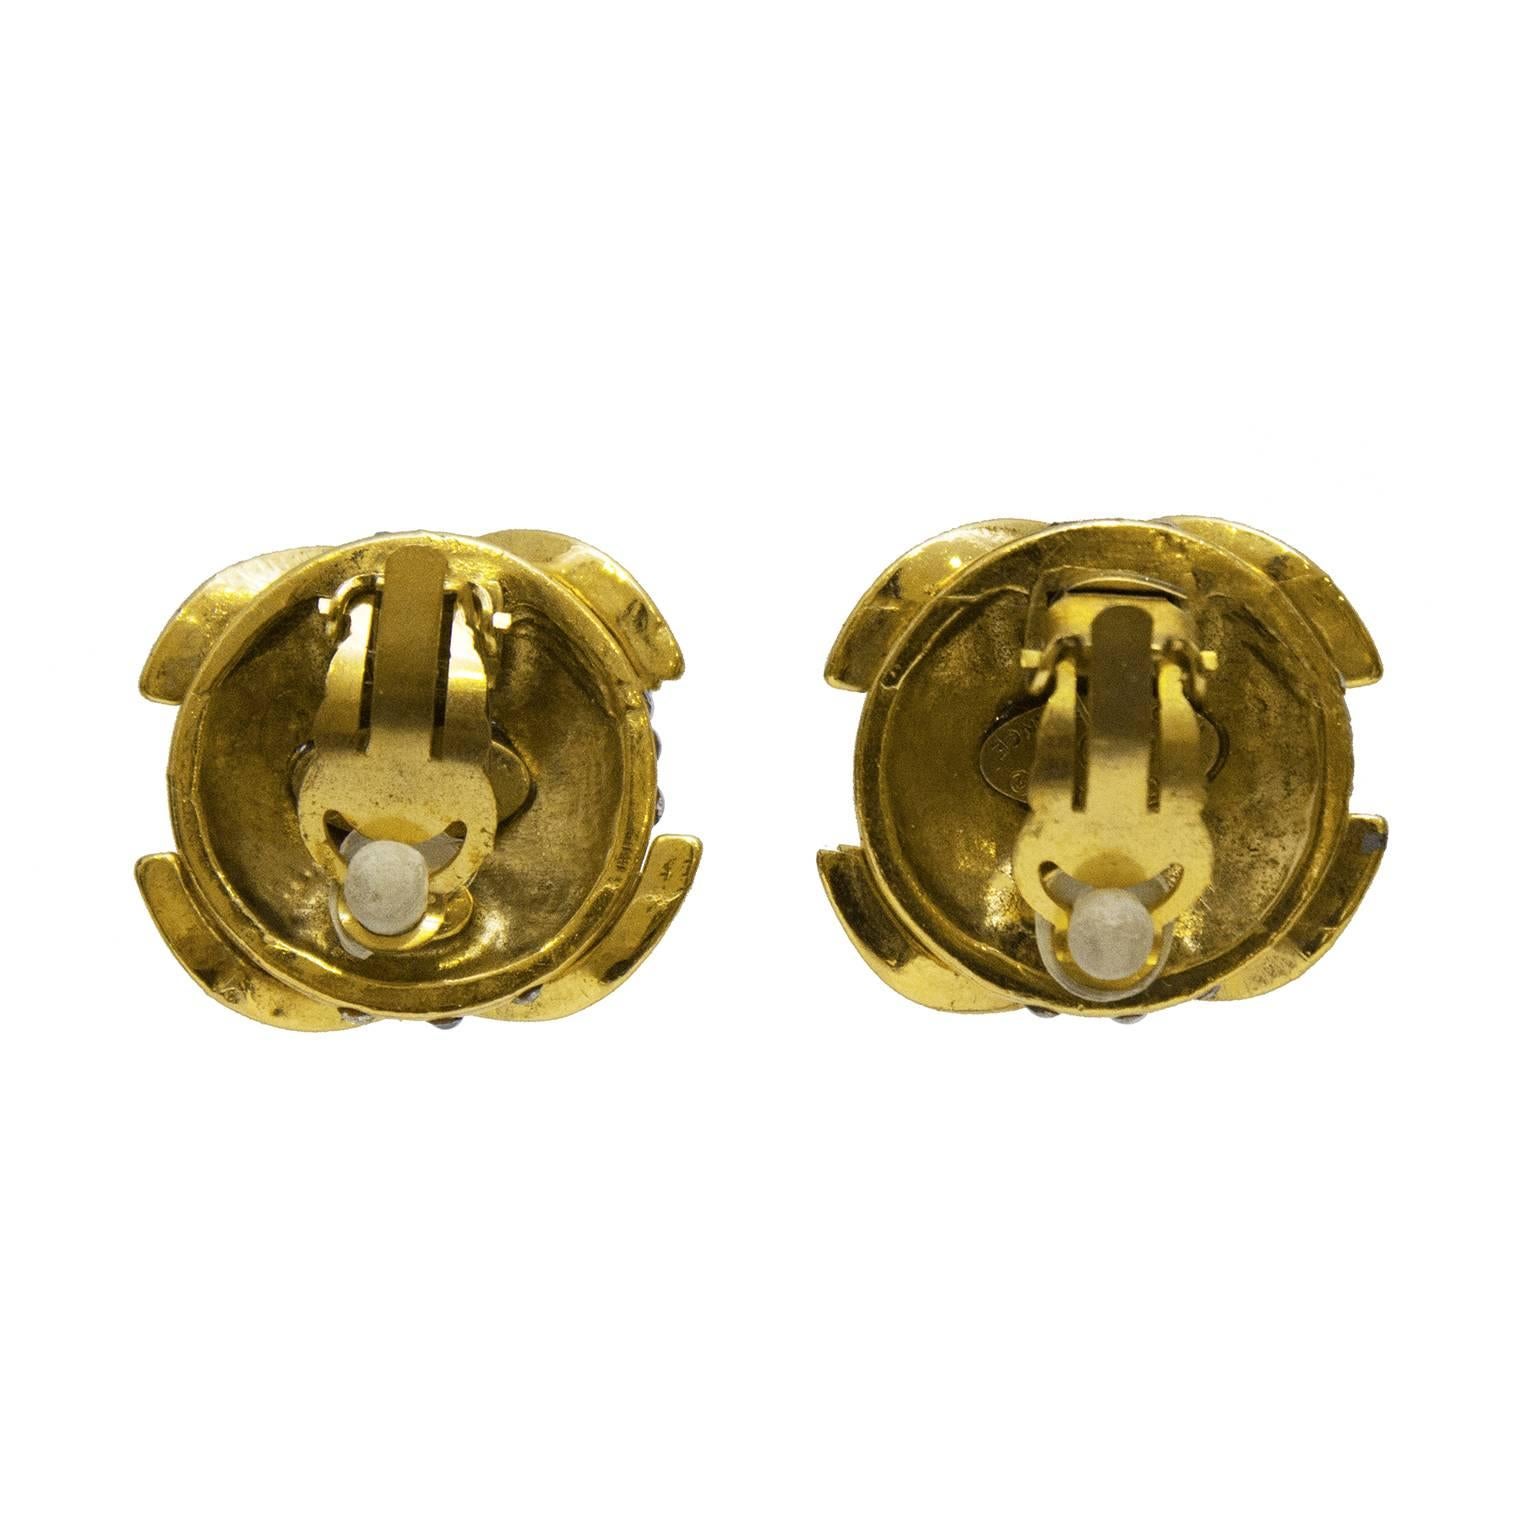 Chanel collection 23 goldtone rhinestone encrusted clip on earrings from the early 1990's. Large round dome covered in small rhinestones with a CC over it. In excellent condition, authenticity plate on the underside. 